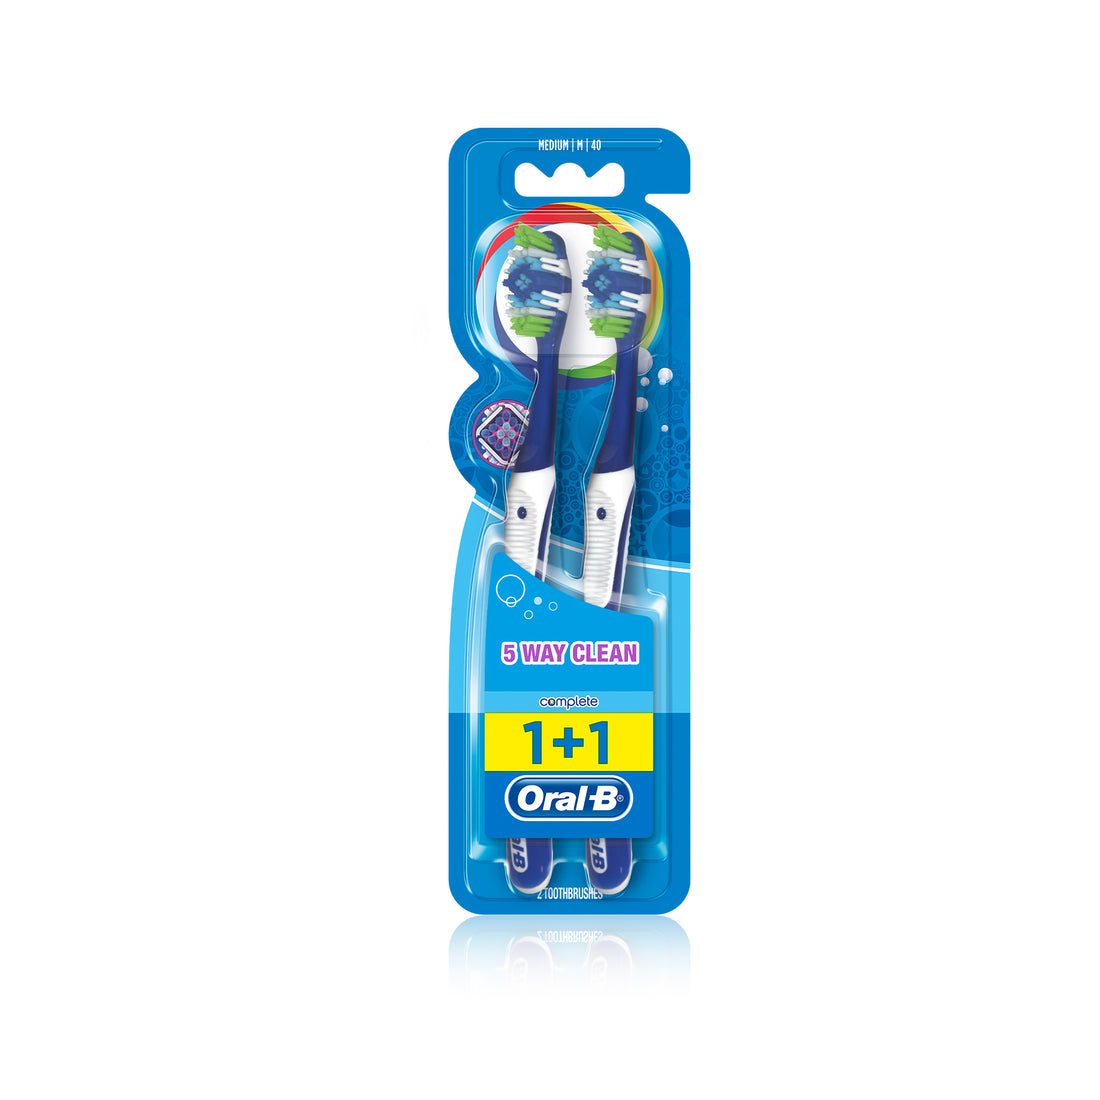 Oral-B Complete Toothbrush 5Way Clean 2 Un